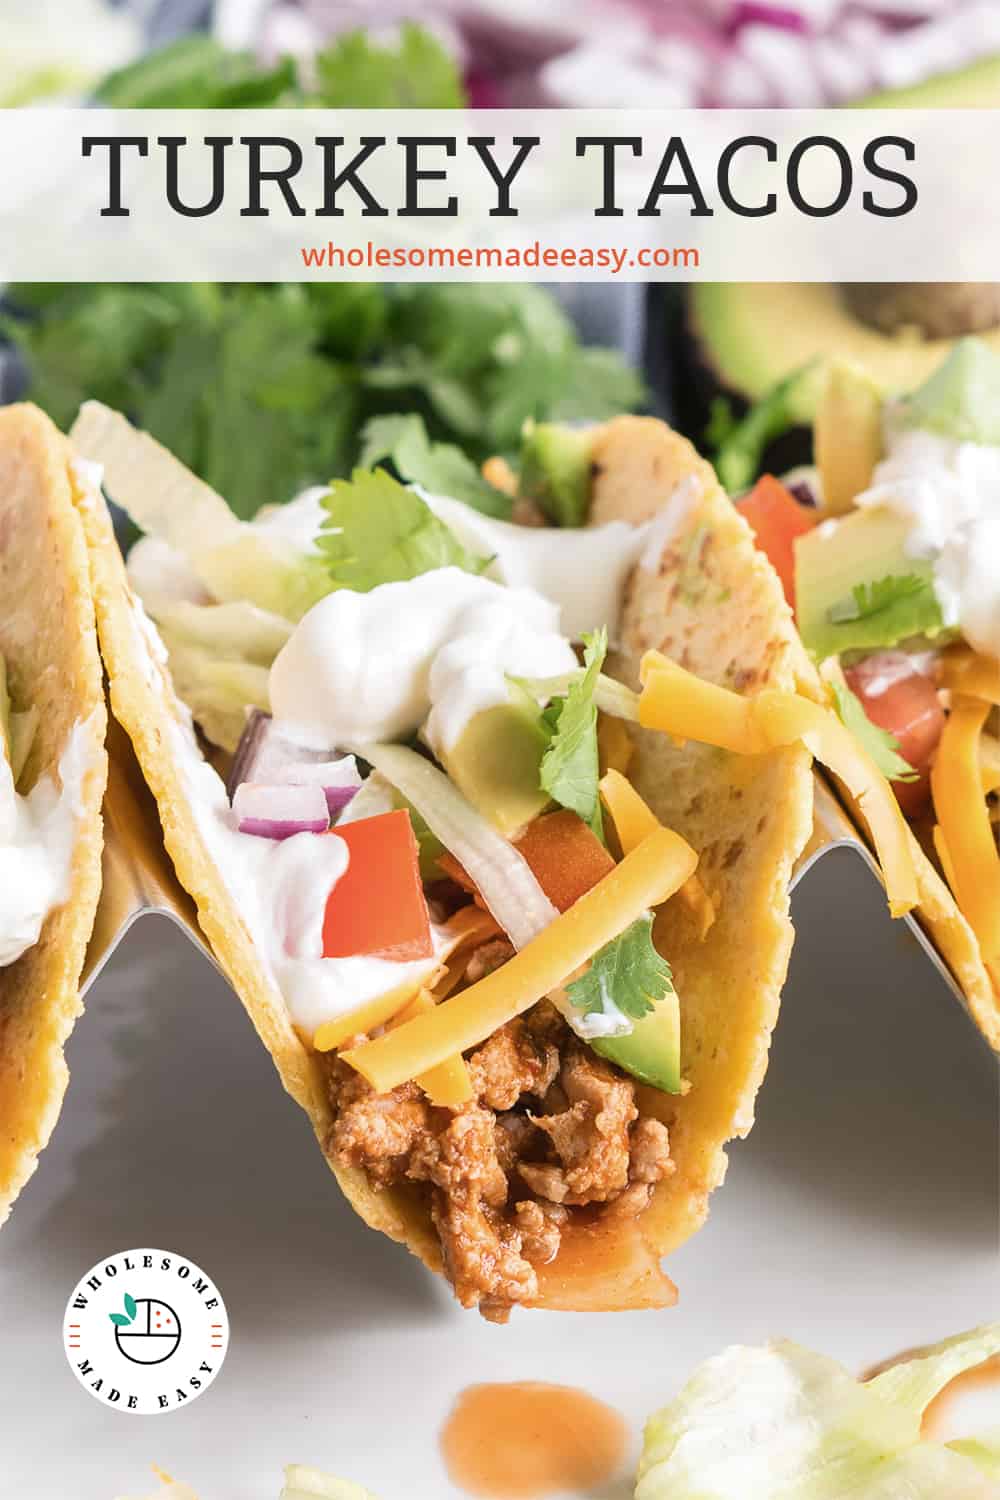 A closeup of a Turkey Taco with toppings with text overlay.